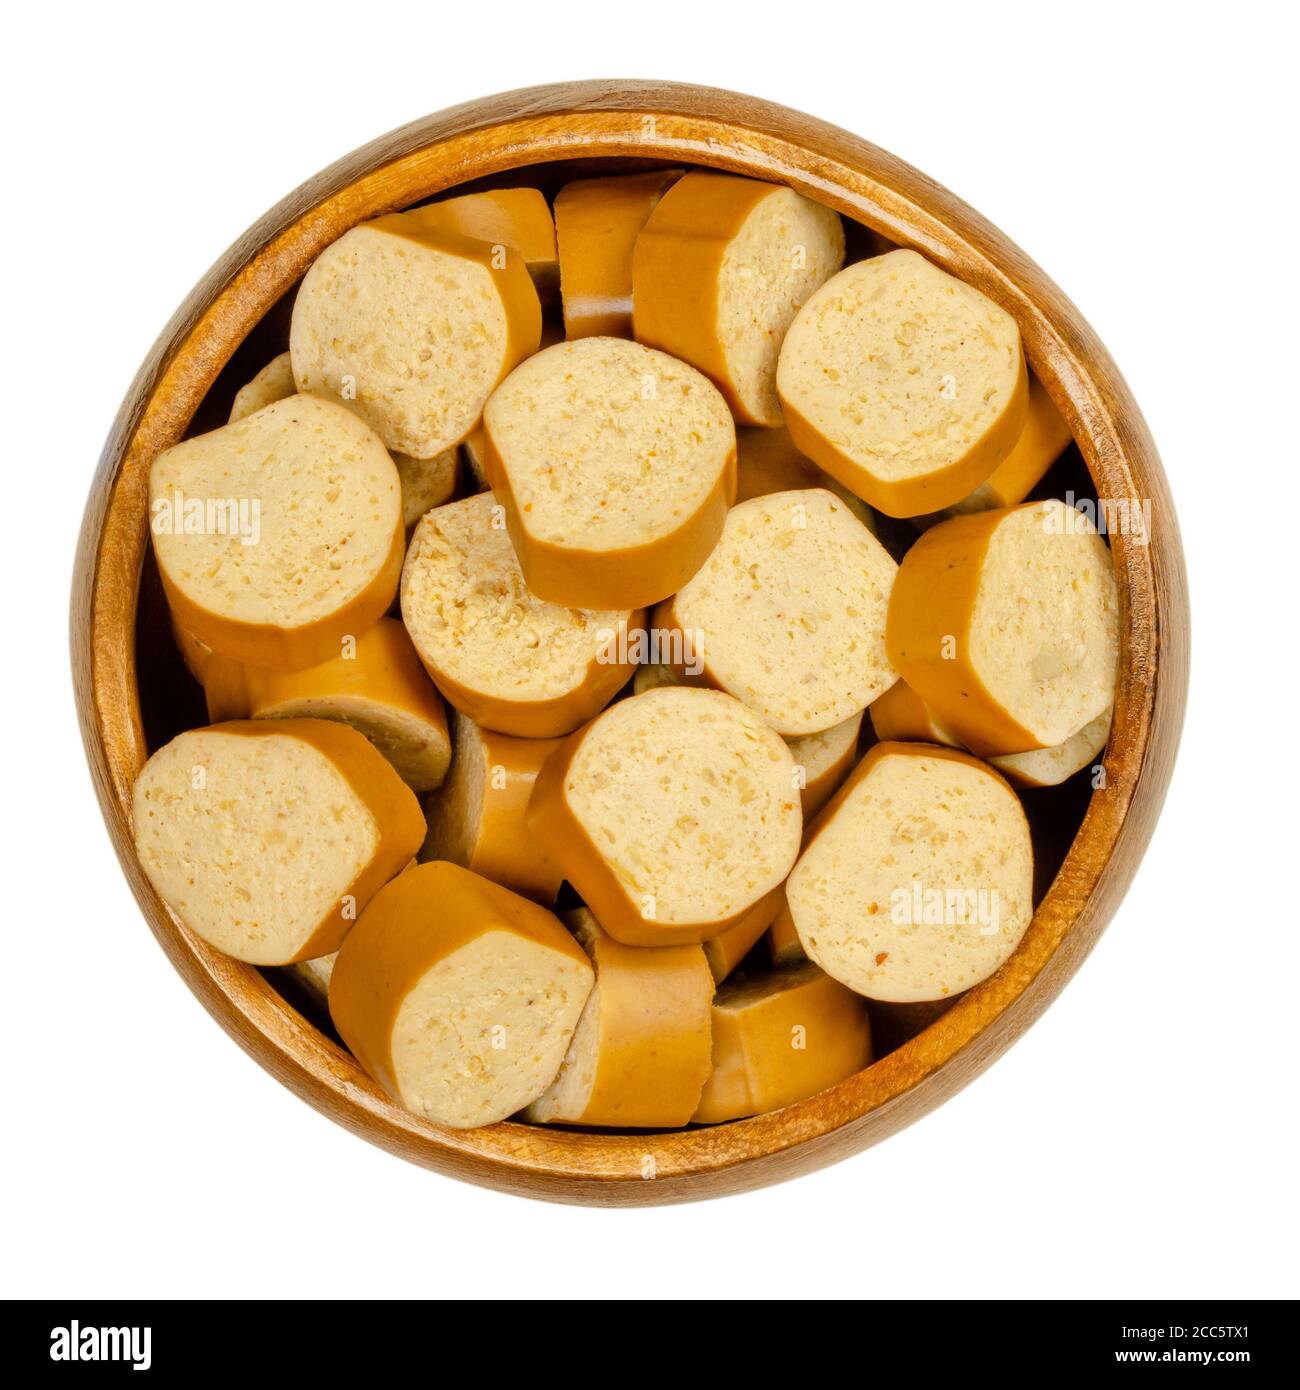 Slices of vegan Vienna sausages in a wooden bowl. Parboiled sausages, made of tofu, smoked at low temperature. Also called Wiener or Frankfurter. Stock Photo